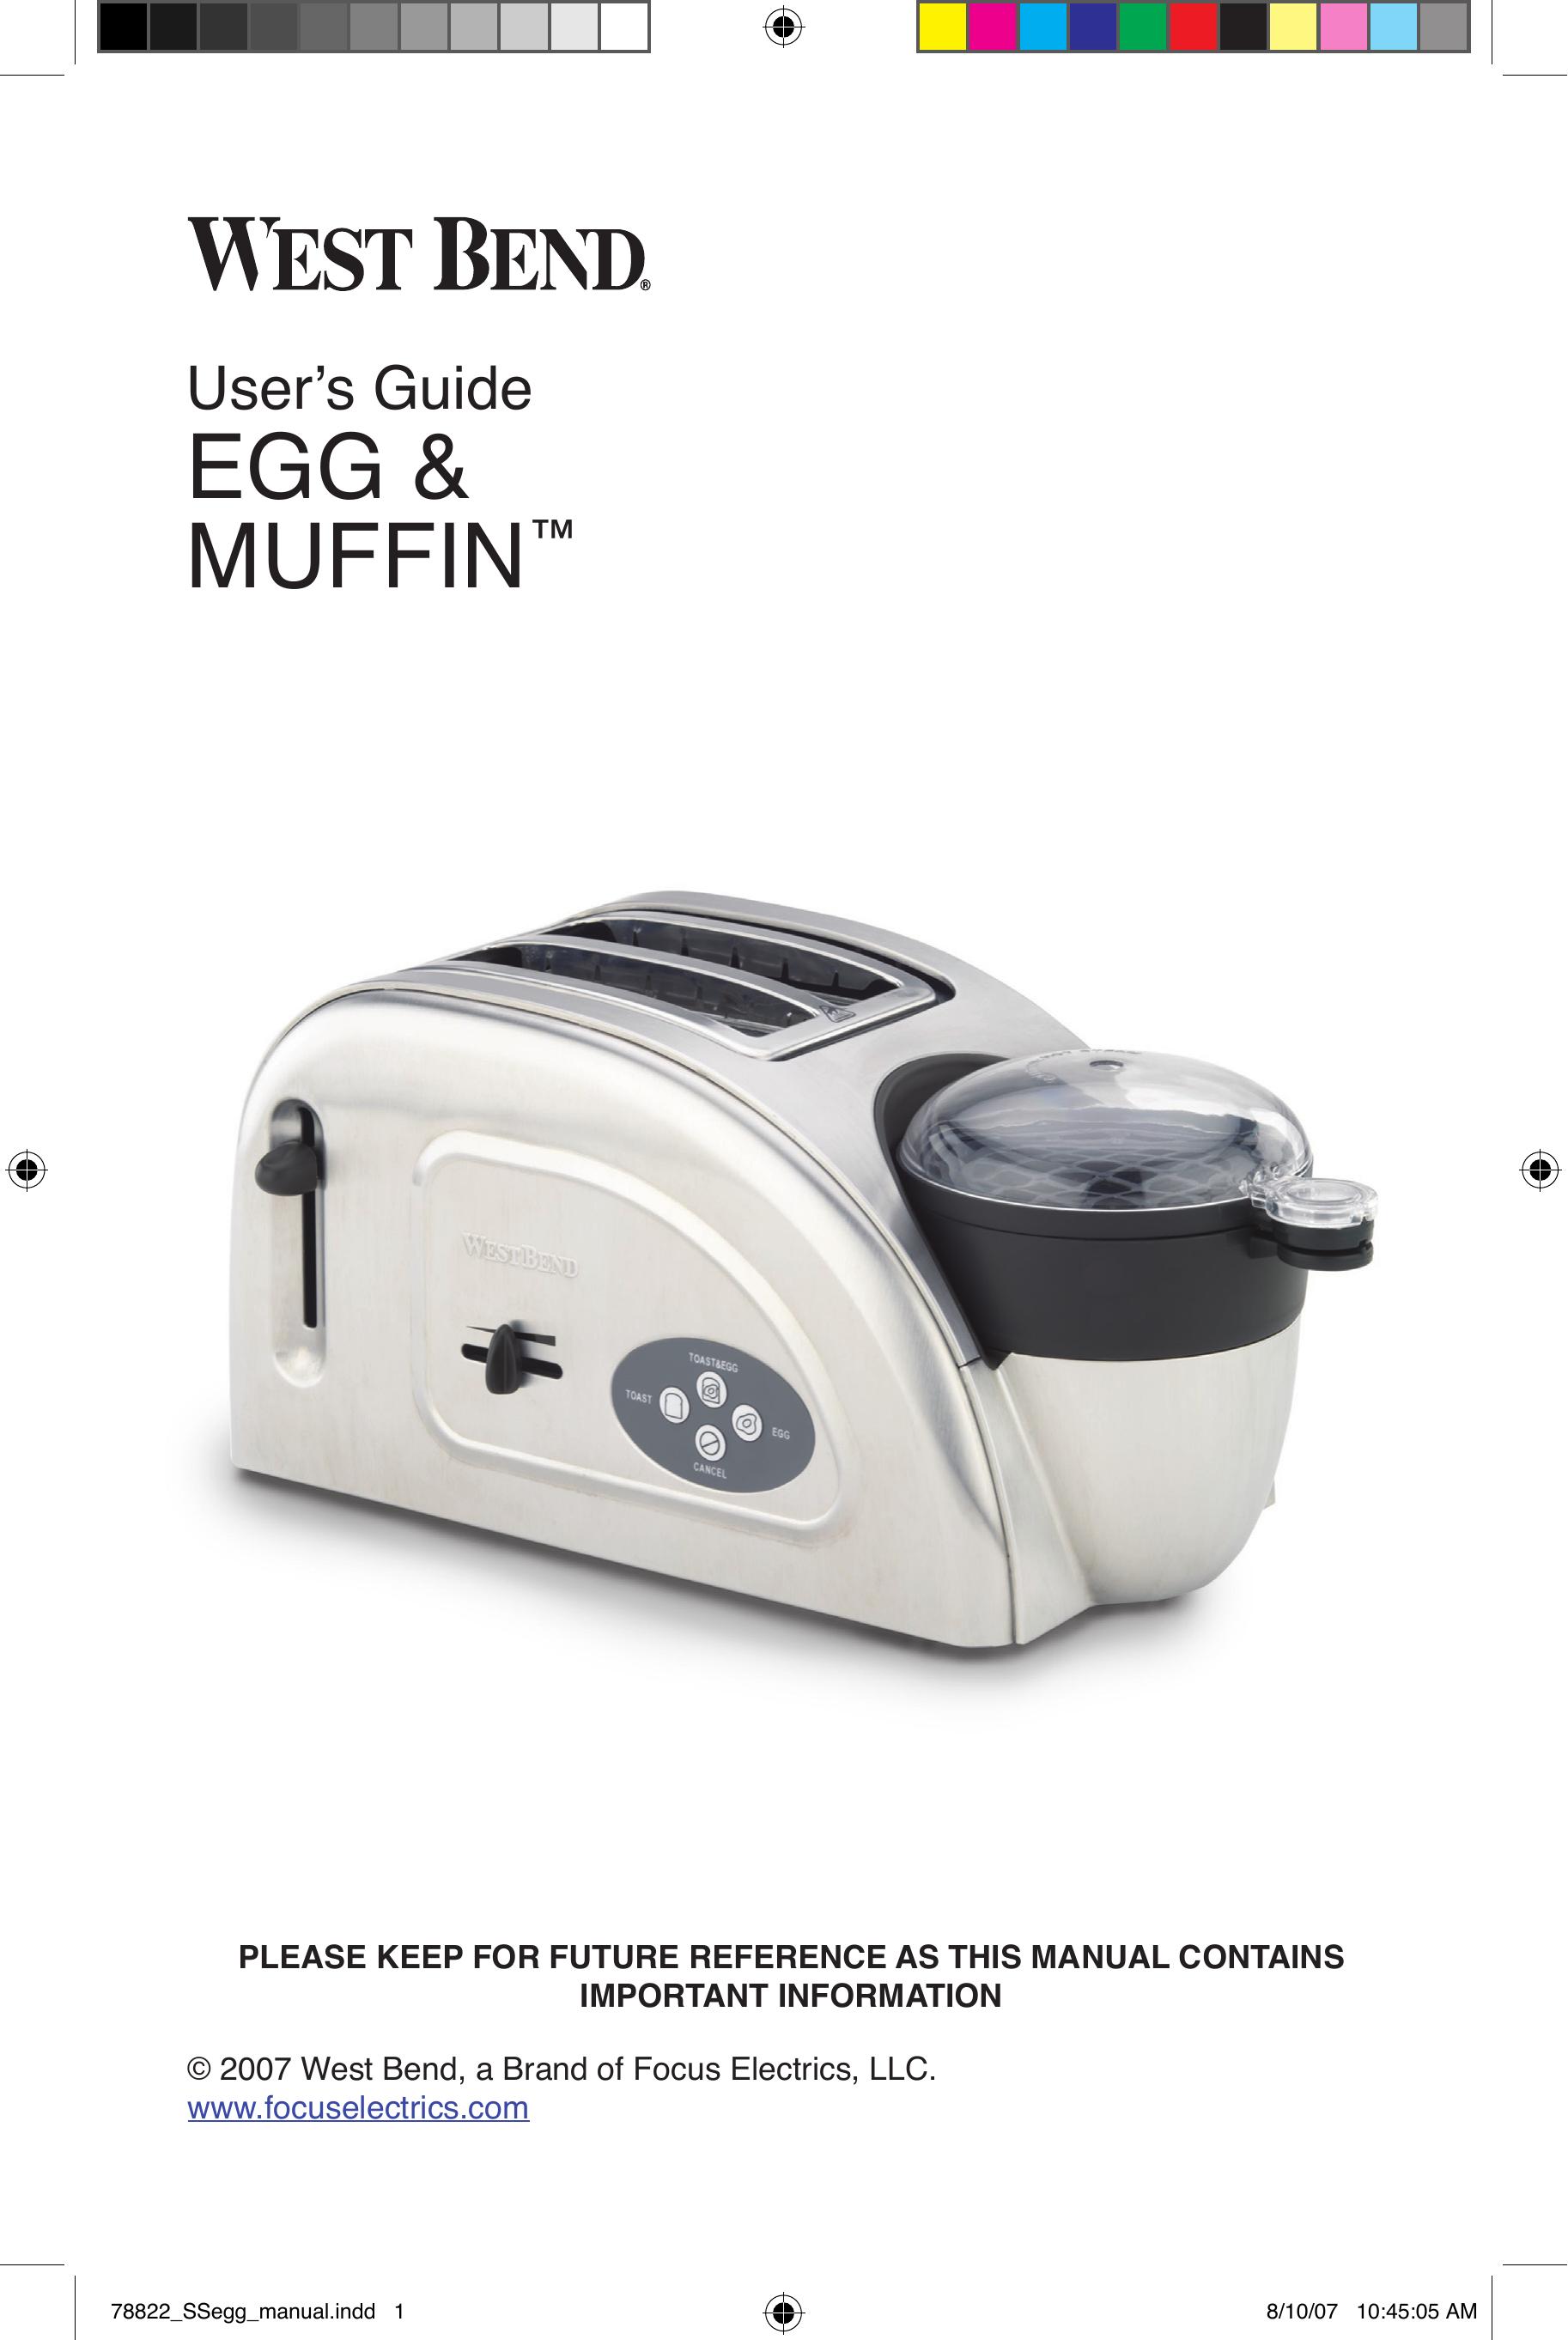 West Bend Egg and Muffin Toaster Toaster User Manual